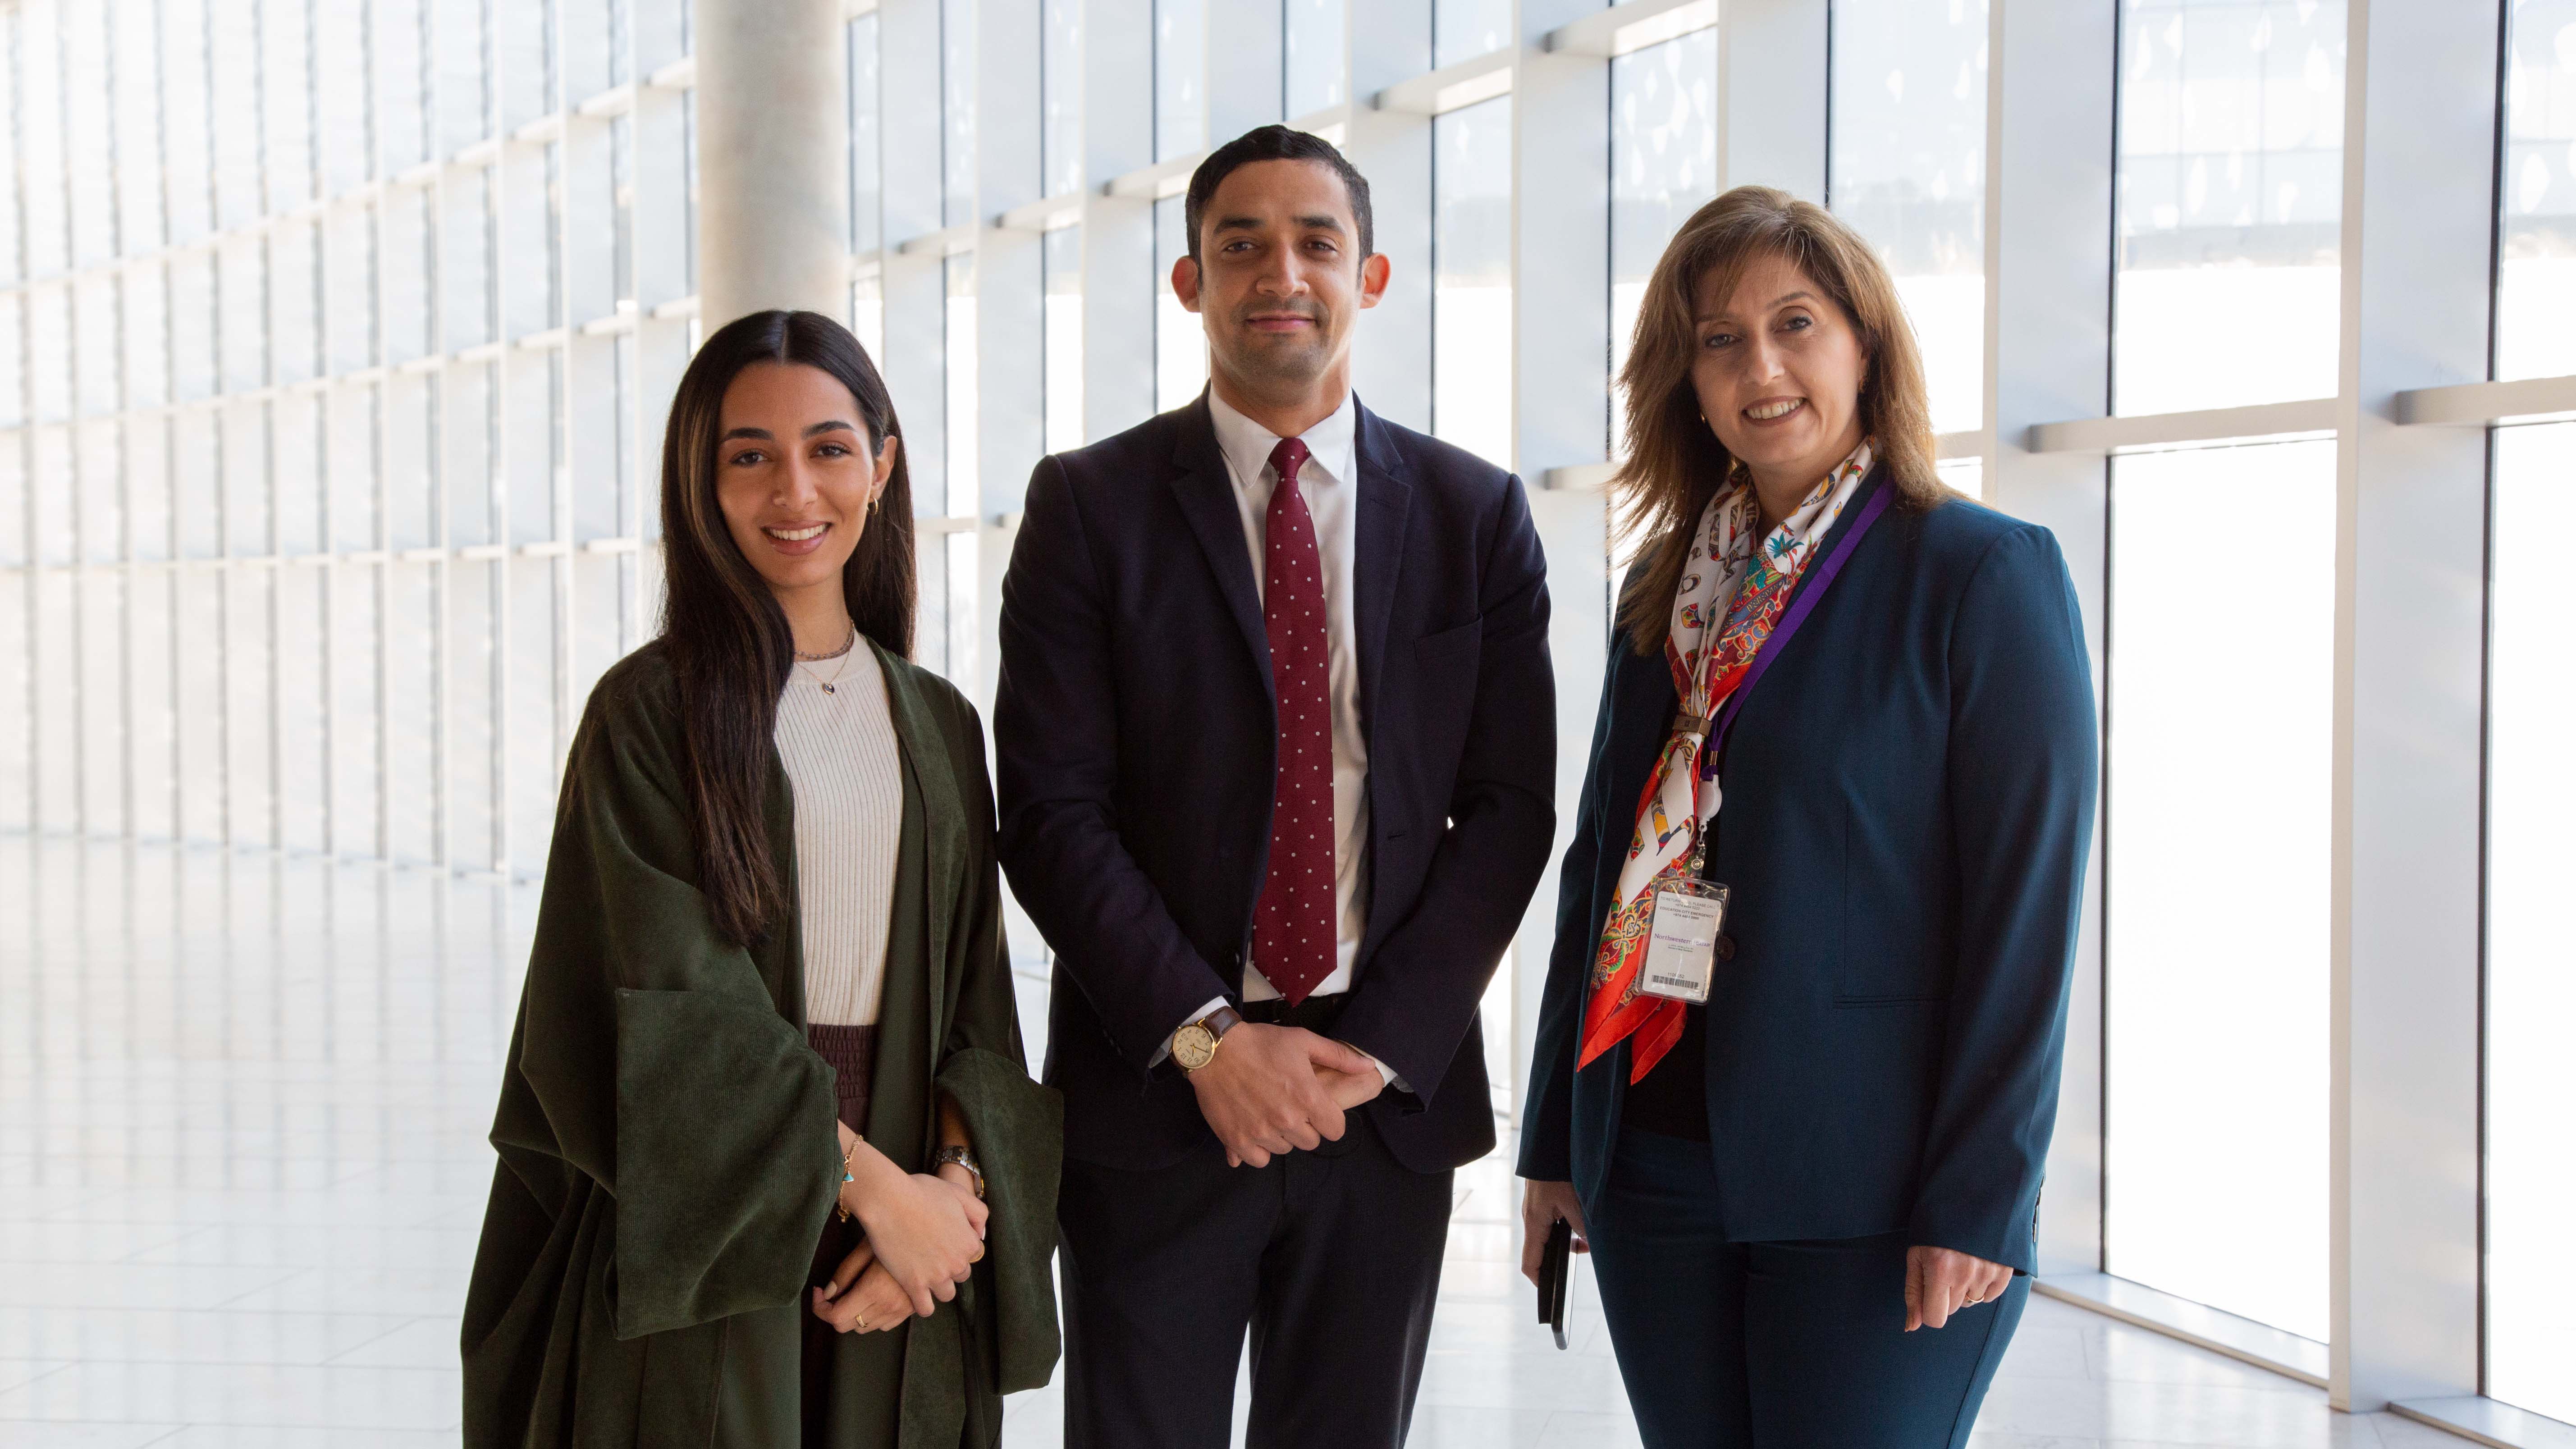 Alessandra El Chanti (left), Carol Ketchijian (right), and Youssef Wahib will utilize local and international expertise to continue to attract the highest caliber of students from inside and outside of Qatar.